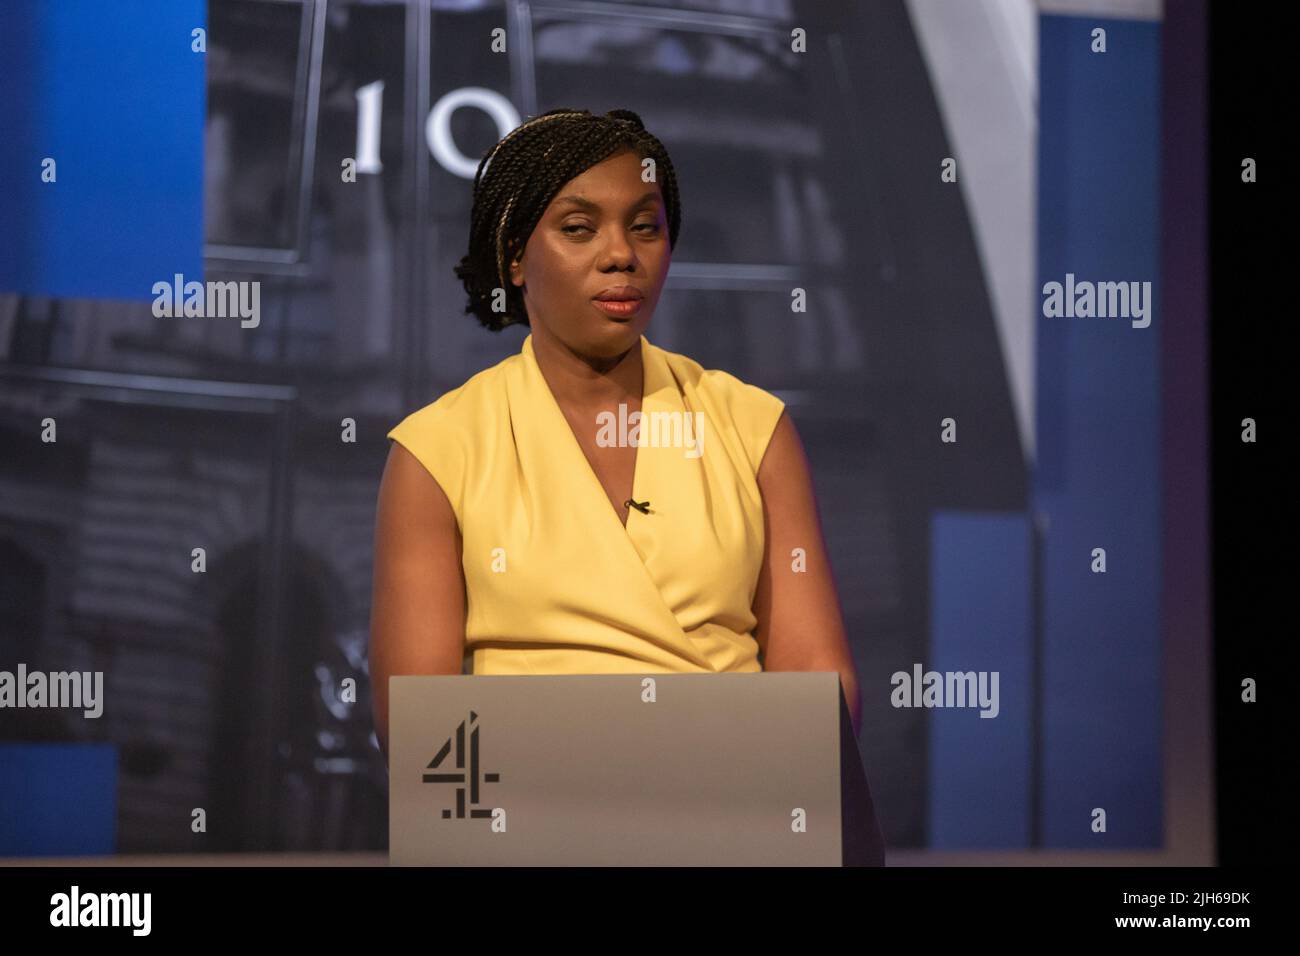 London, England, UK. 15th July, 2022. Conservative Party Leadership  candidate KEMI BADENOCH is seen in the BT Studios ahead of first TV debate  in Conservative Party leadership race. (Credit Image: © Tayfun